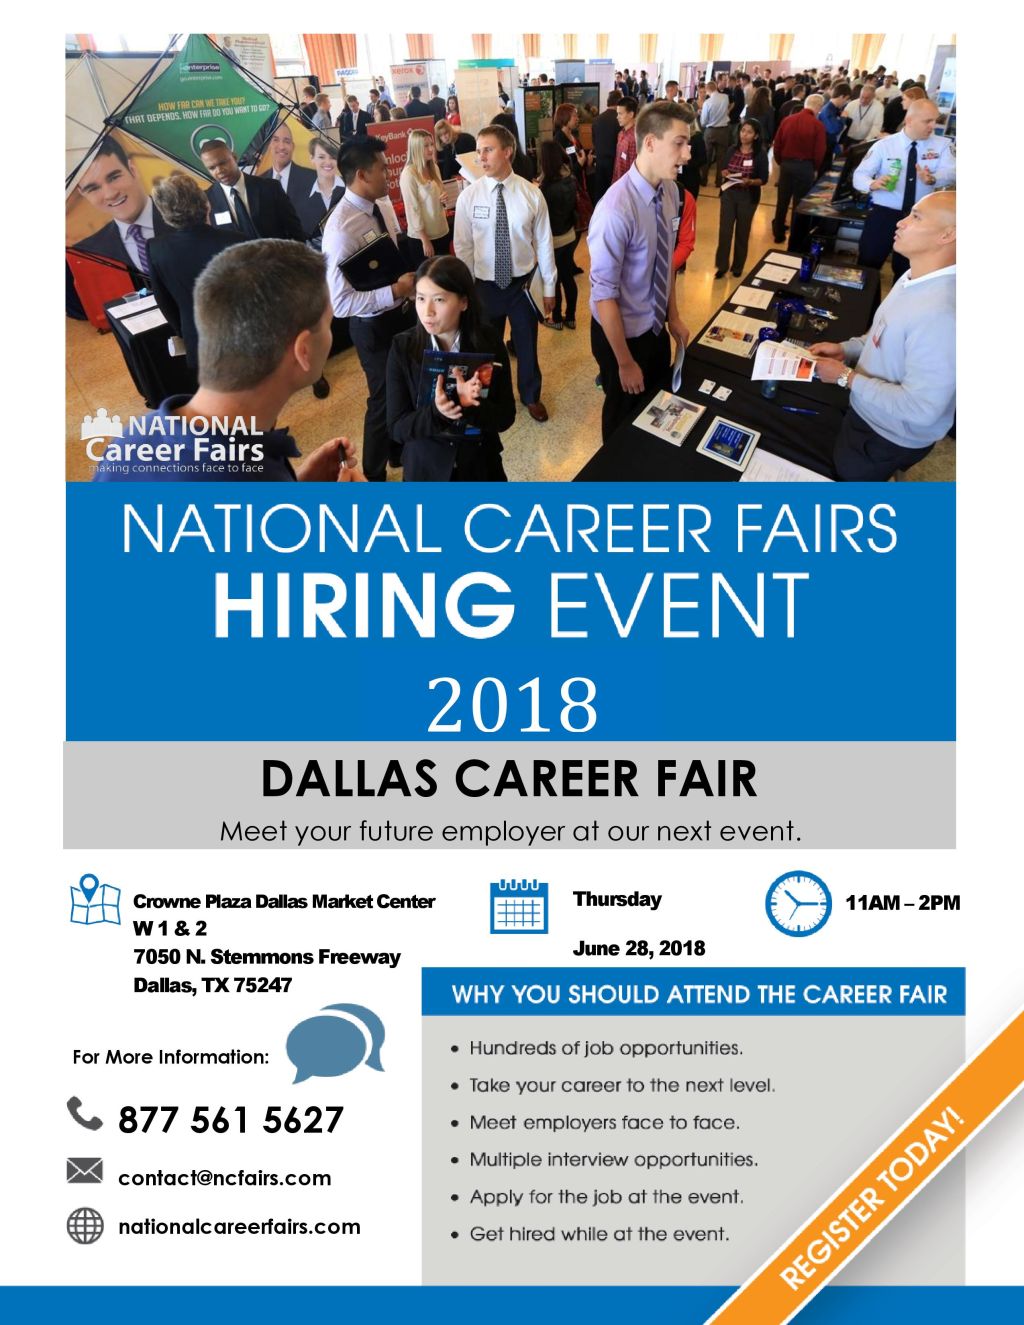 National Career Fairs Hiring Event On June 28th